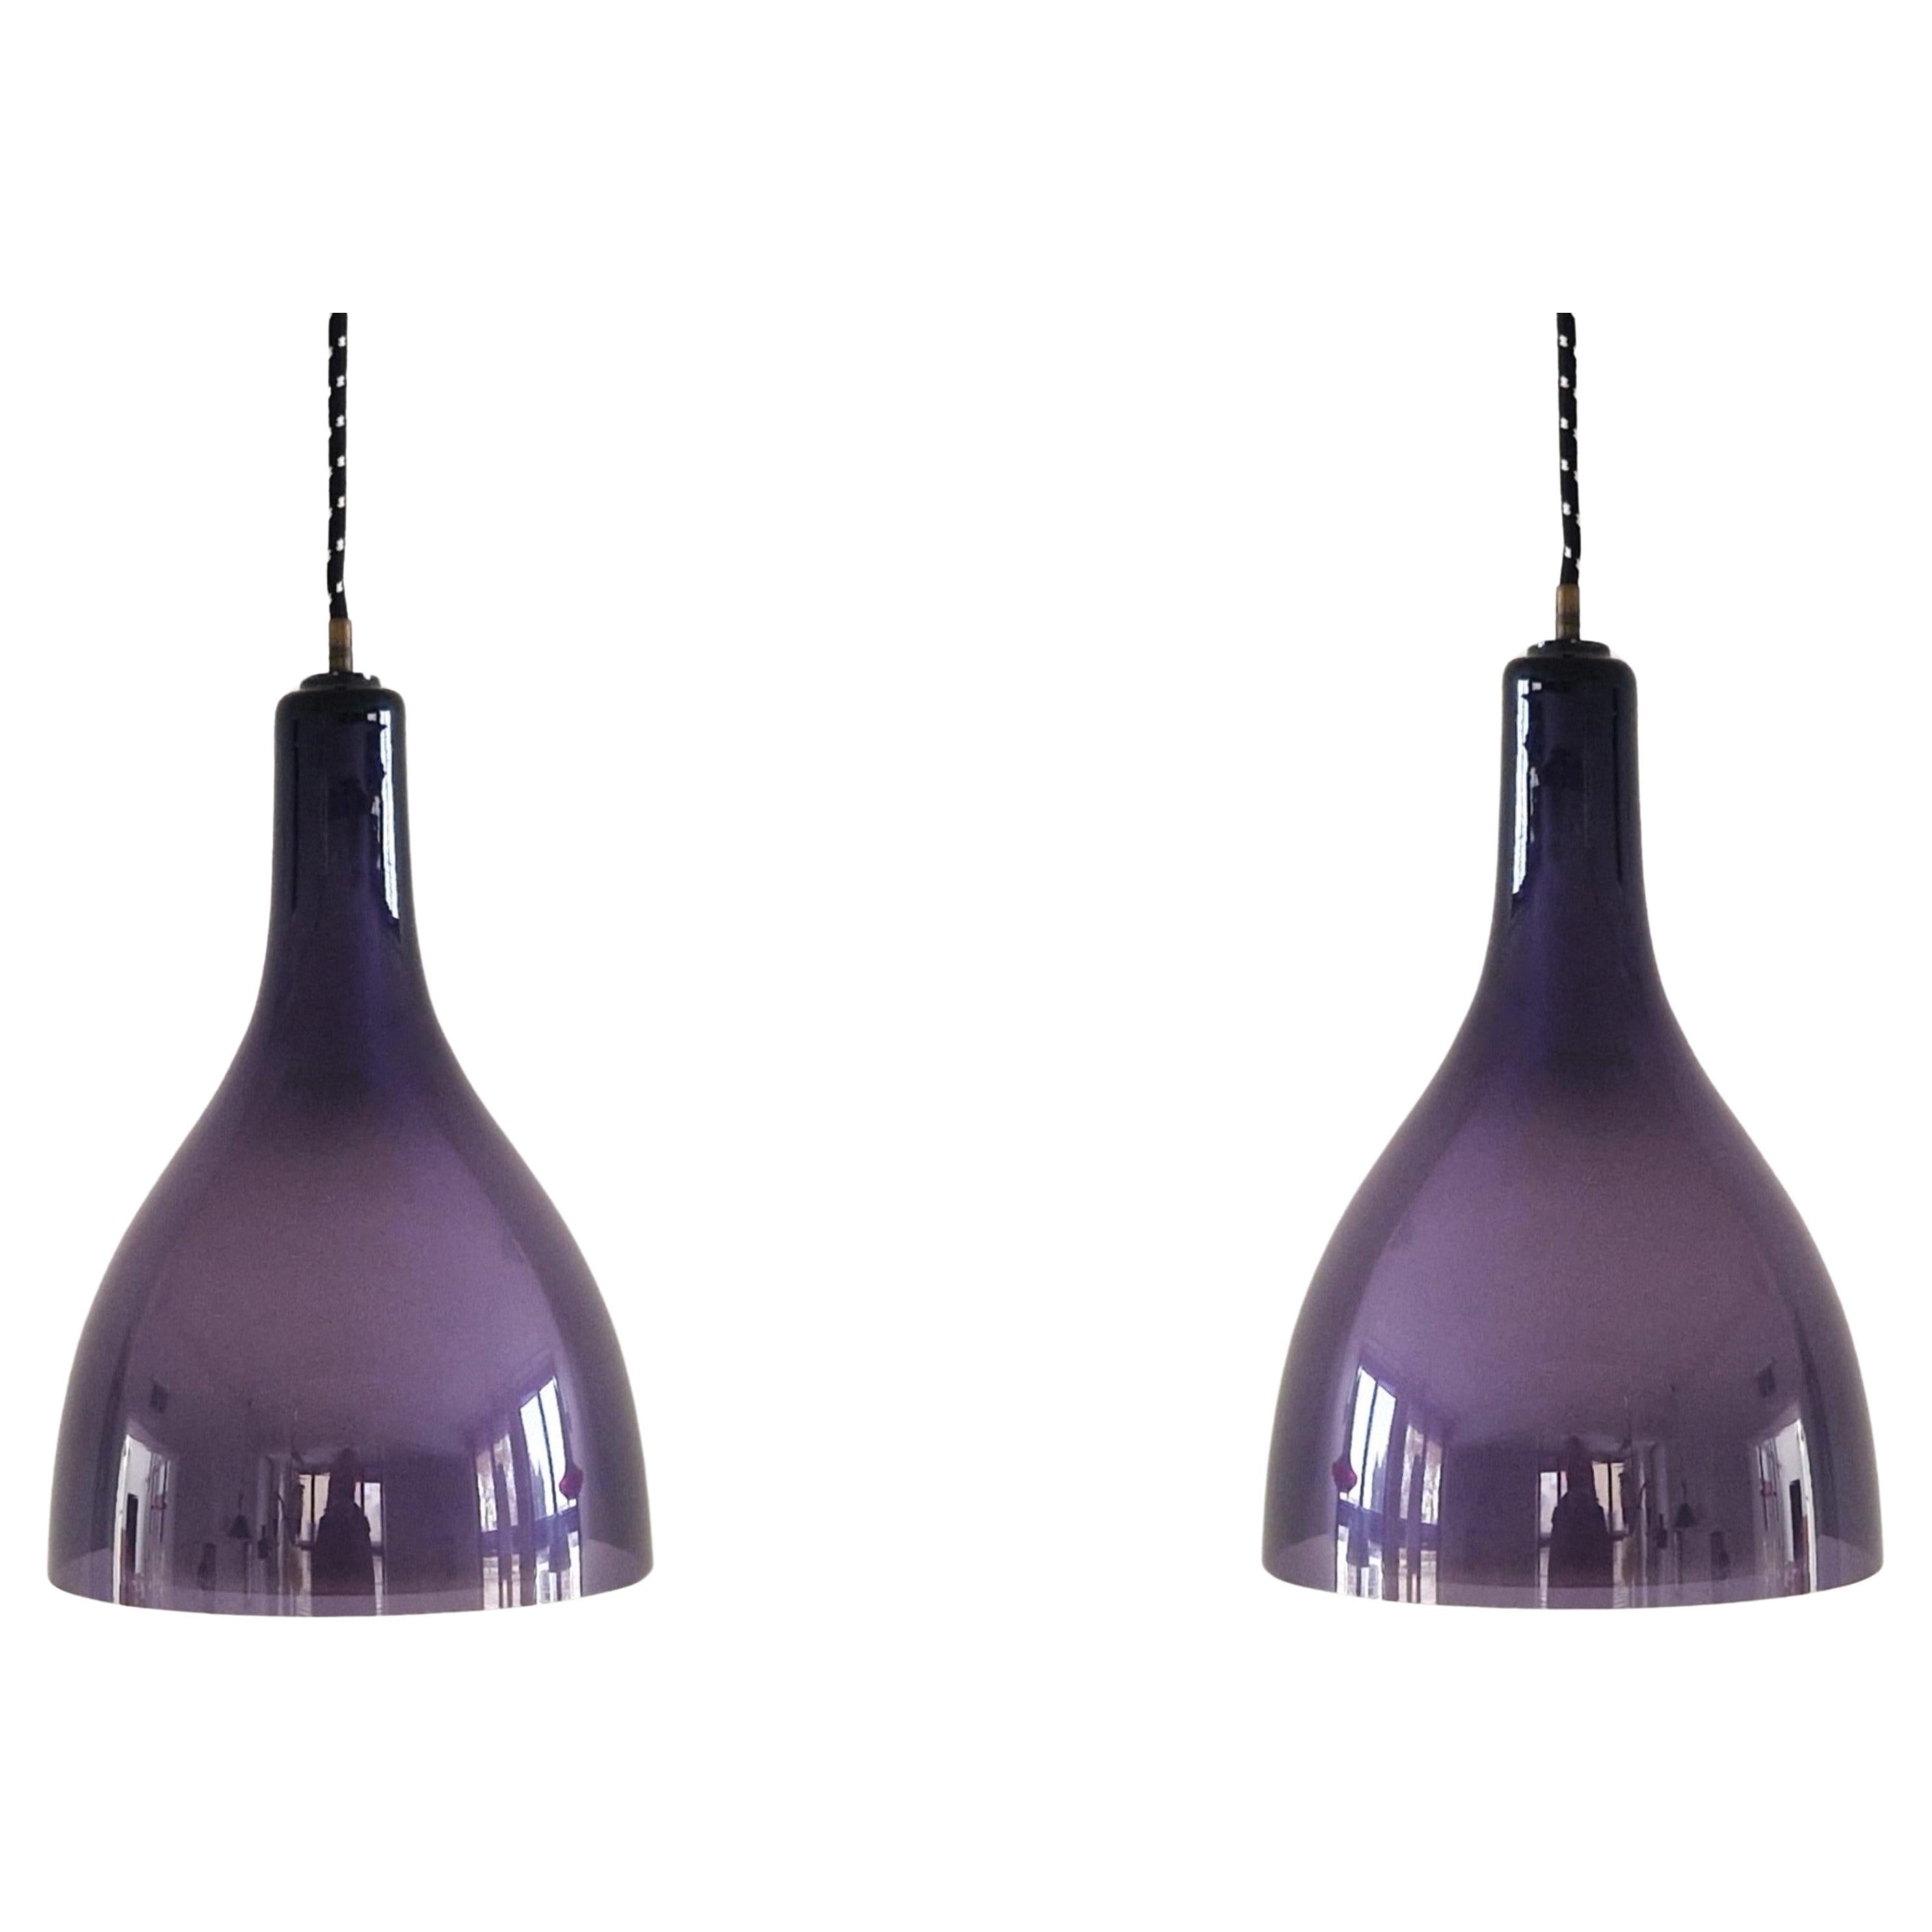 Set of 2 purple and white glass pendant lamps, 1960's / 1970's For Sale